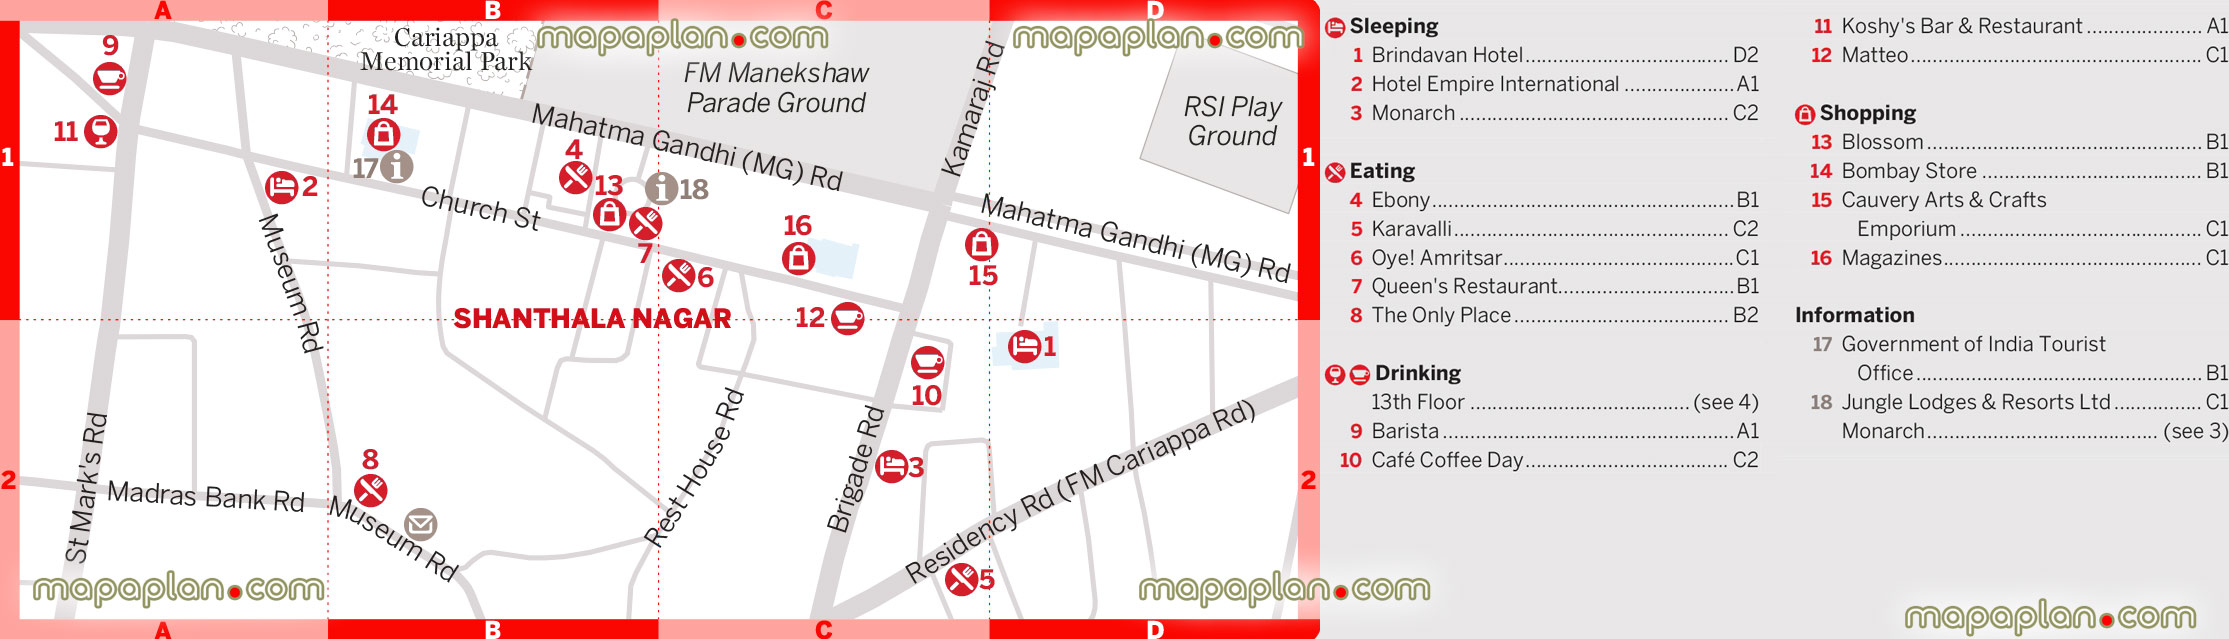 bengaluru mg road area city center printable walking directions interesting sights simple easy navigate diagram holiday top points interest central district neighourhood orientation tourist information tourism offices Bangalore Top tourist attractions map